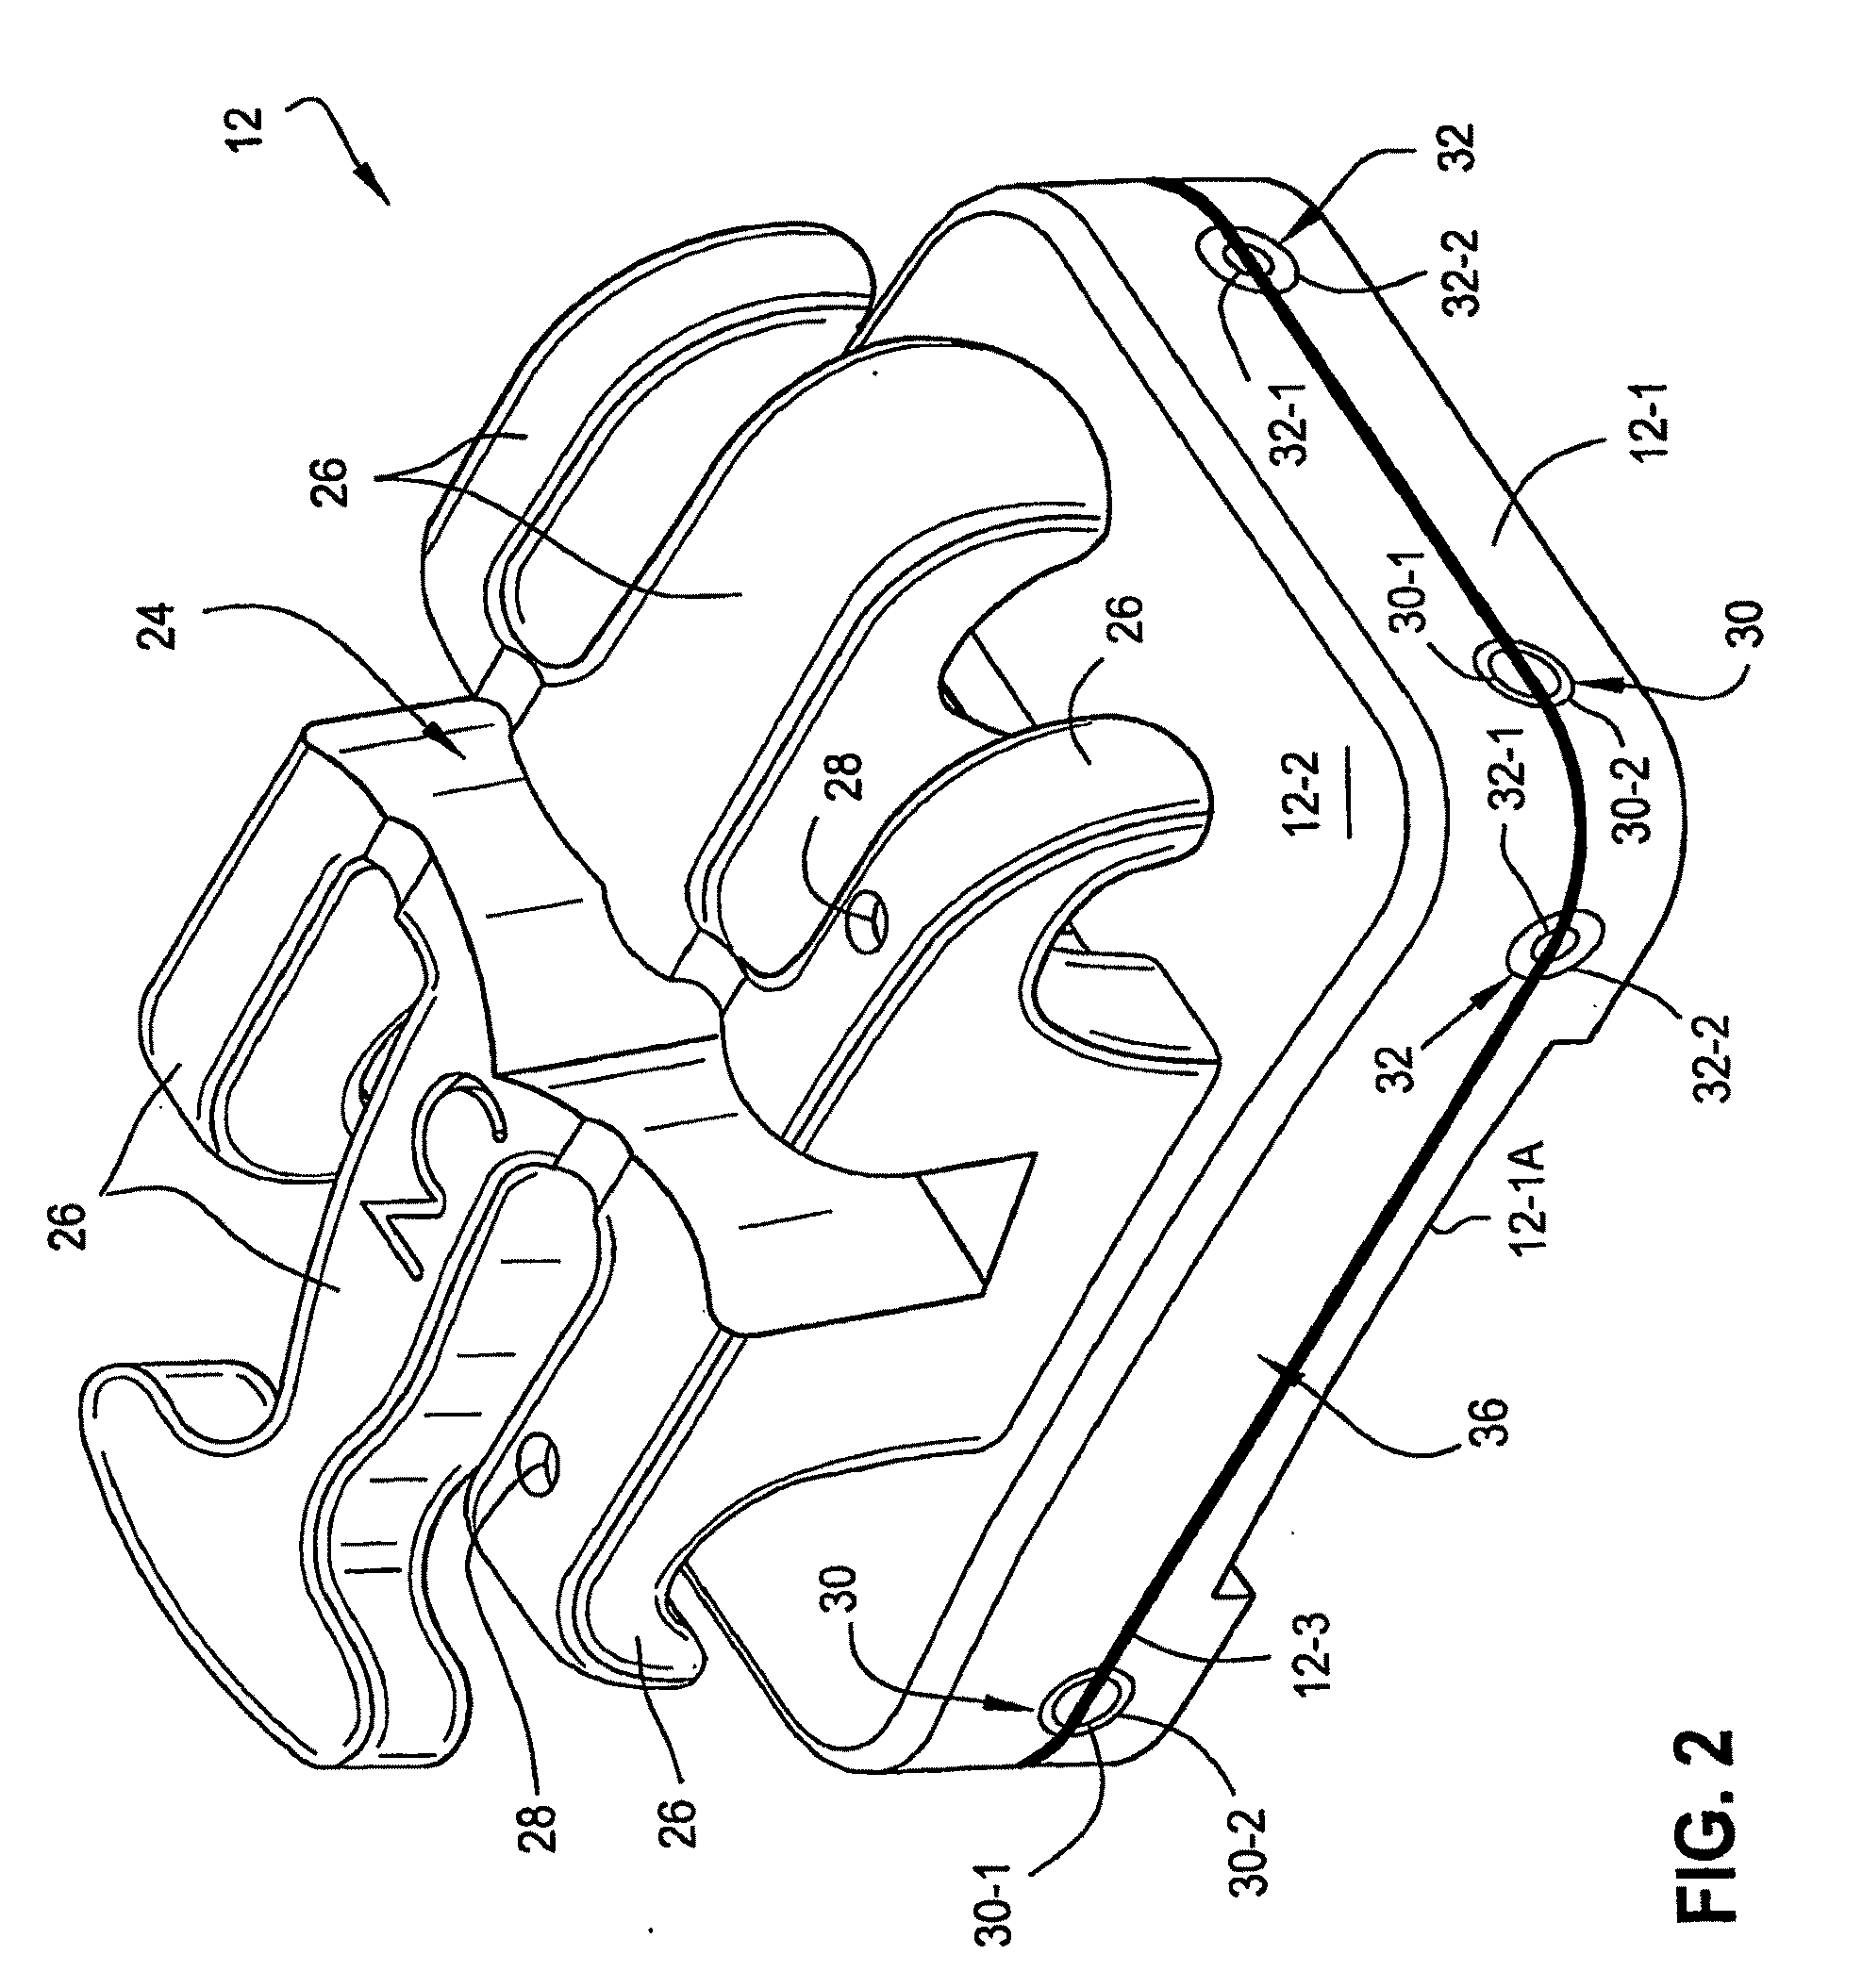 Method and System for Determining a Force and/or Torque Applied to an Orthodontic Bracket